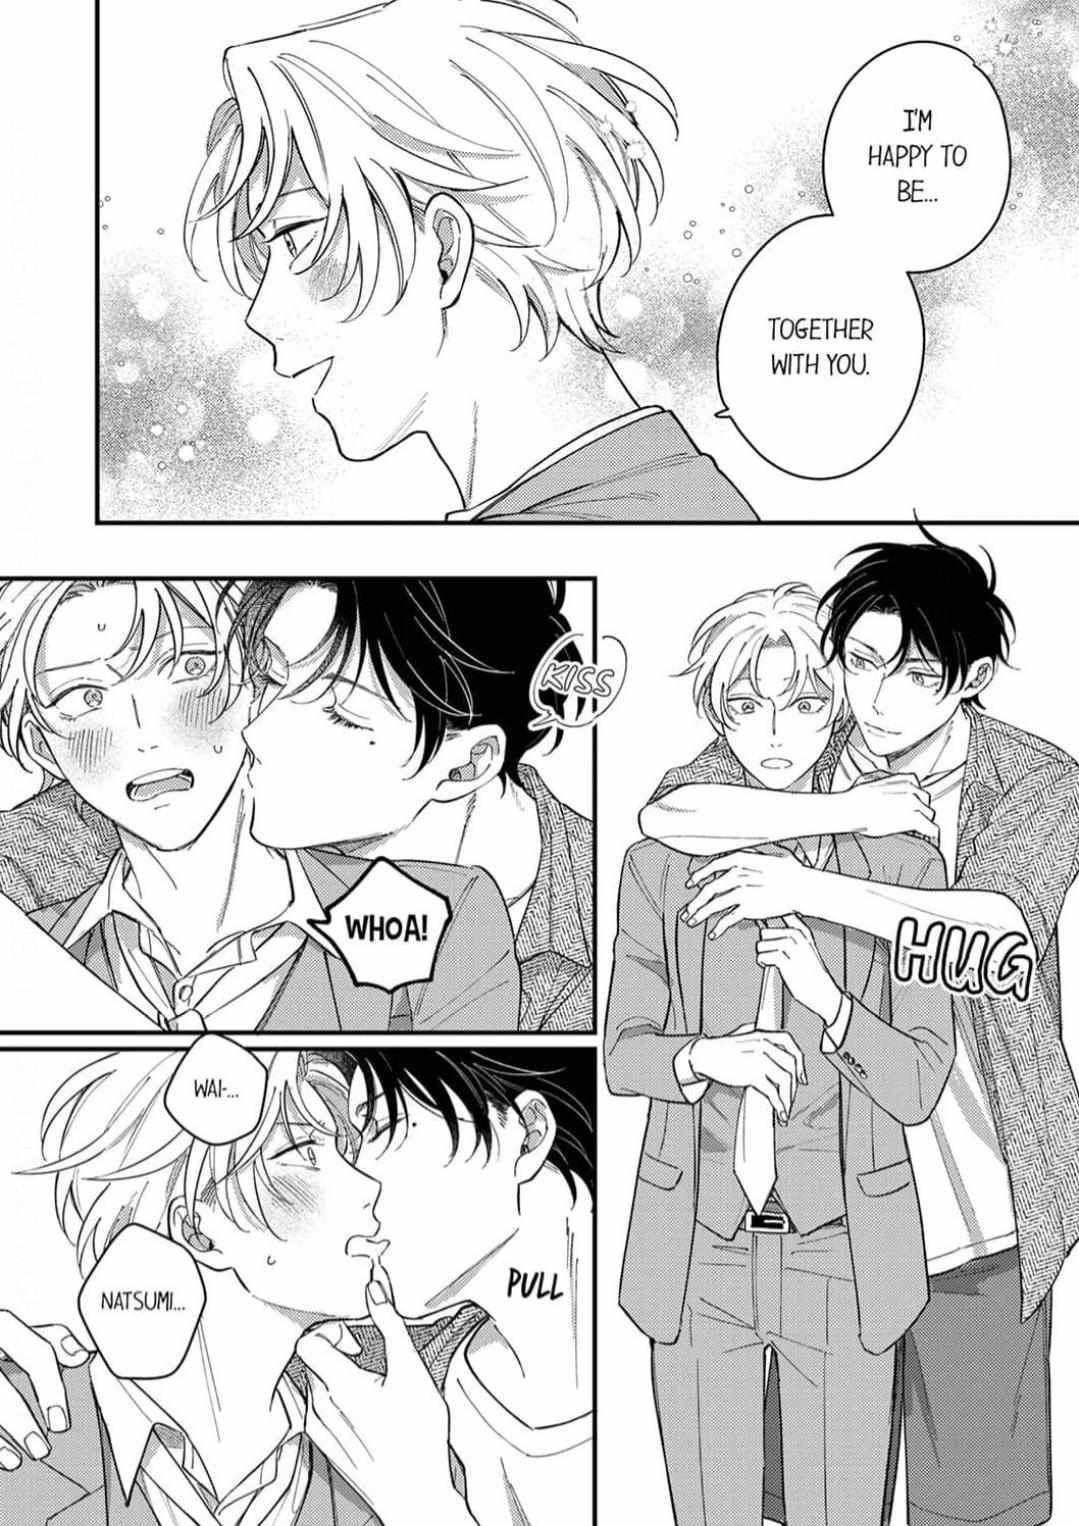 A Vacation With Passionate Kisses - chapter 7 - #4